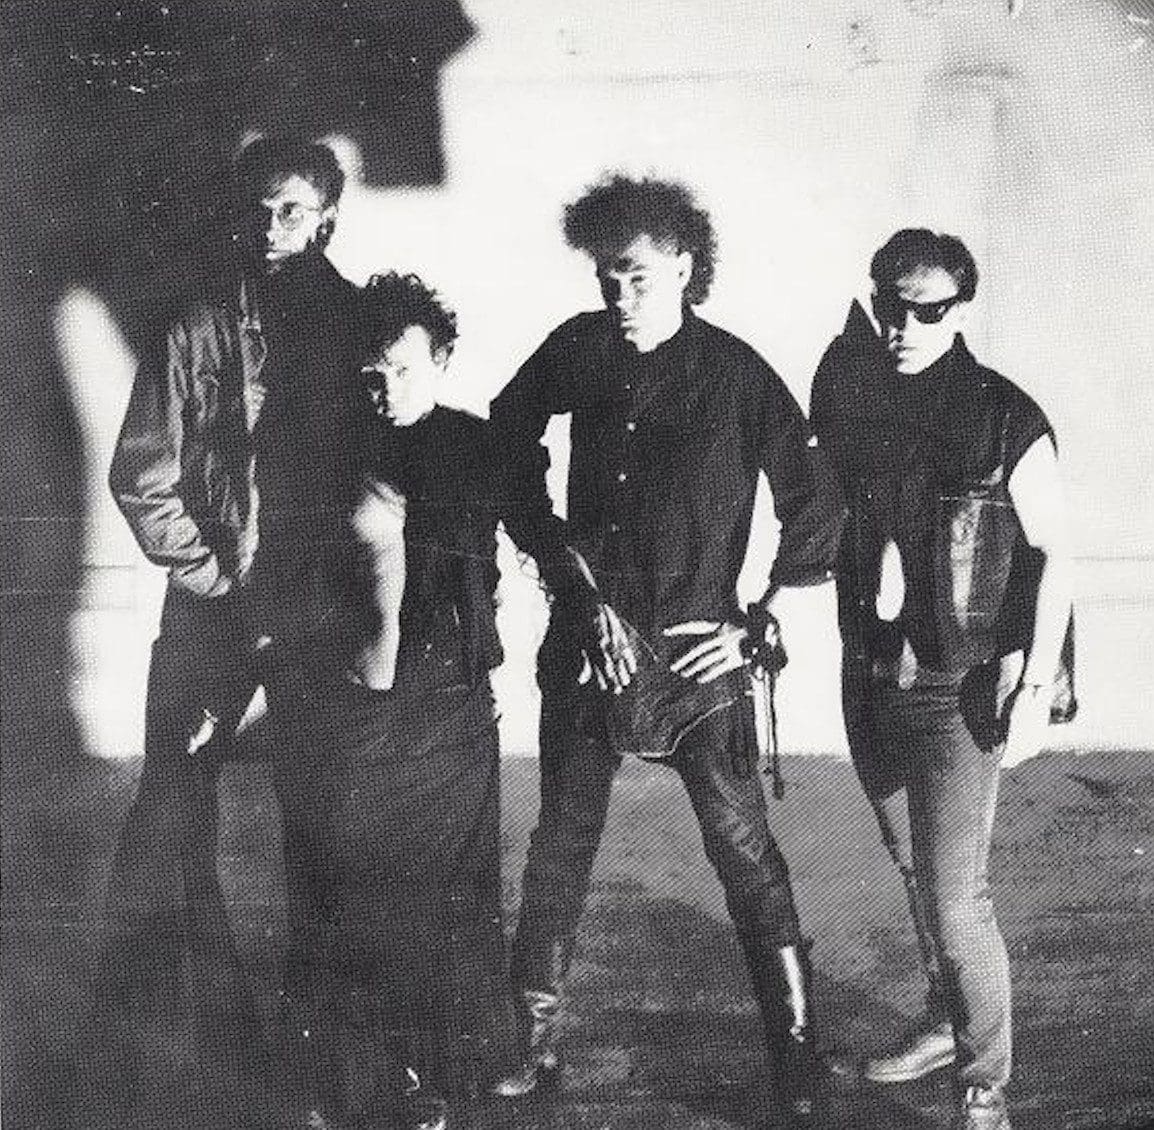 Swedish post-punk/goth pioneers The Bizarre Orkeztra re-release 1984 single 'Land' in a remastered version